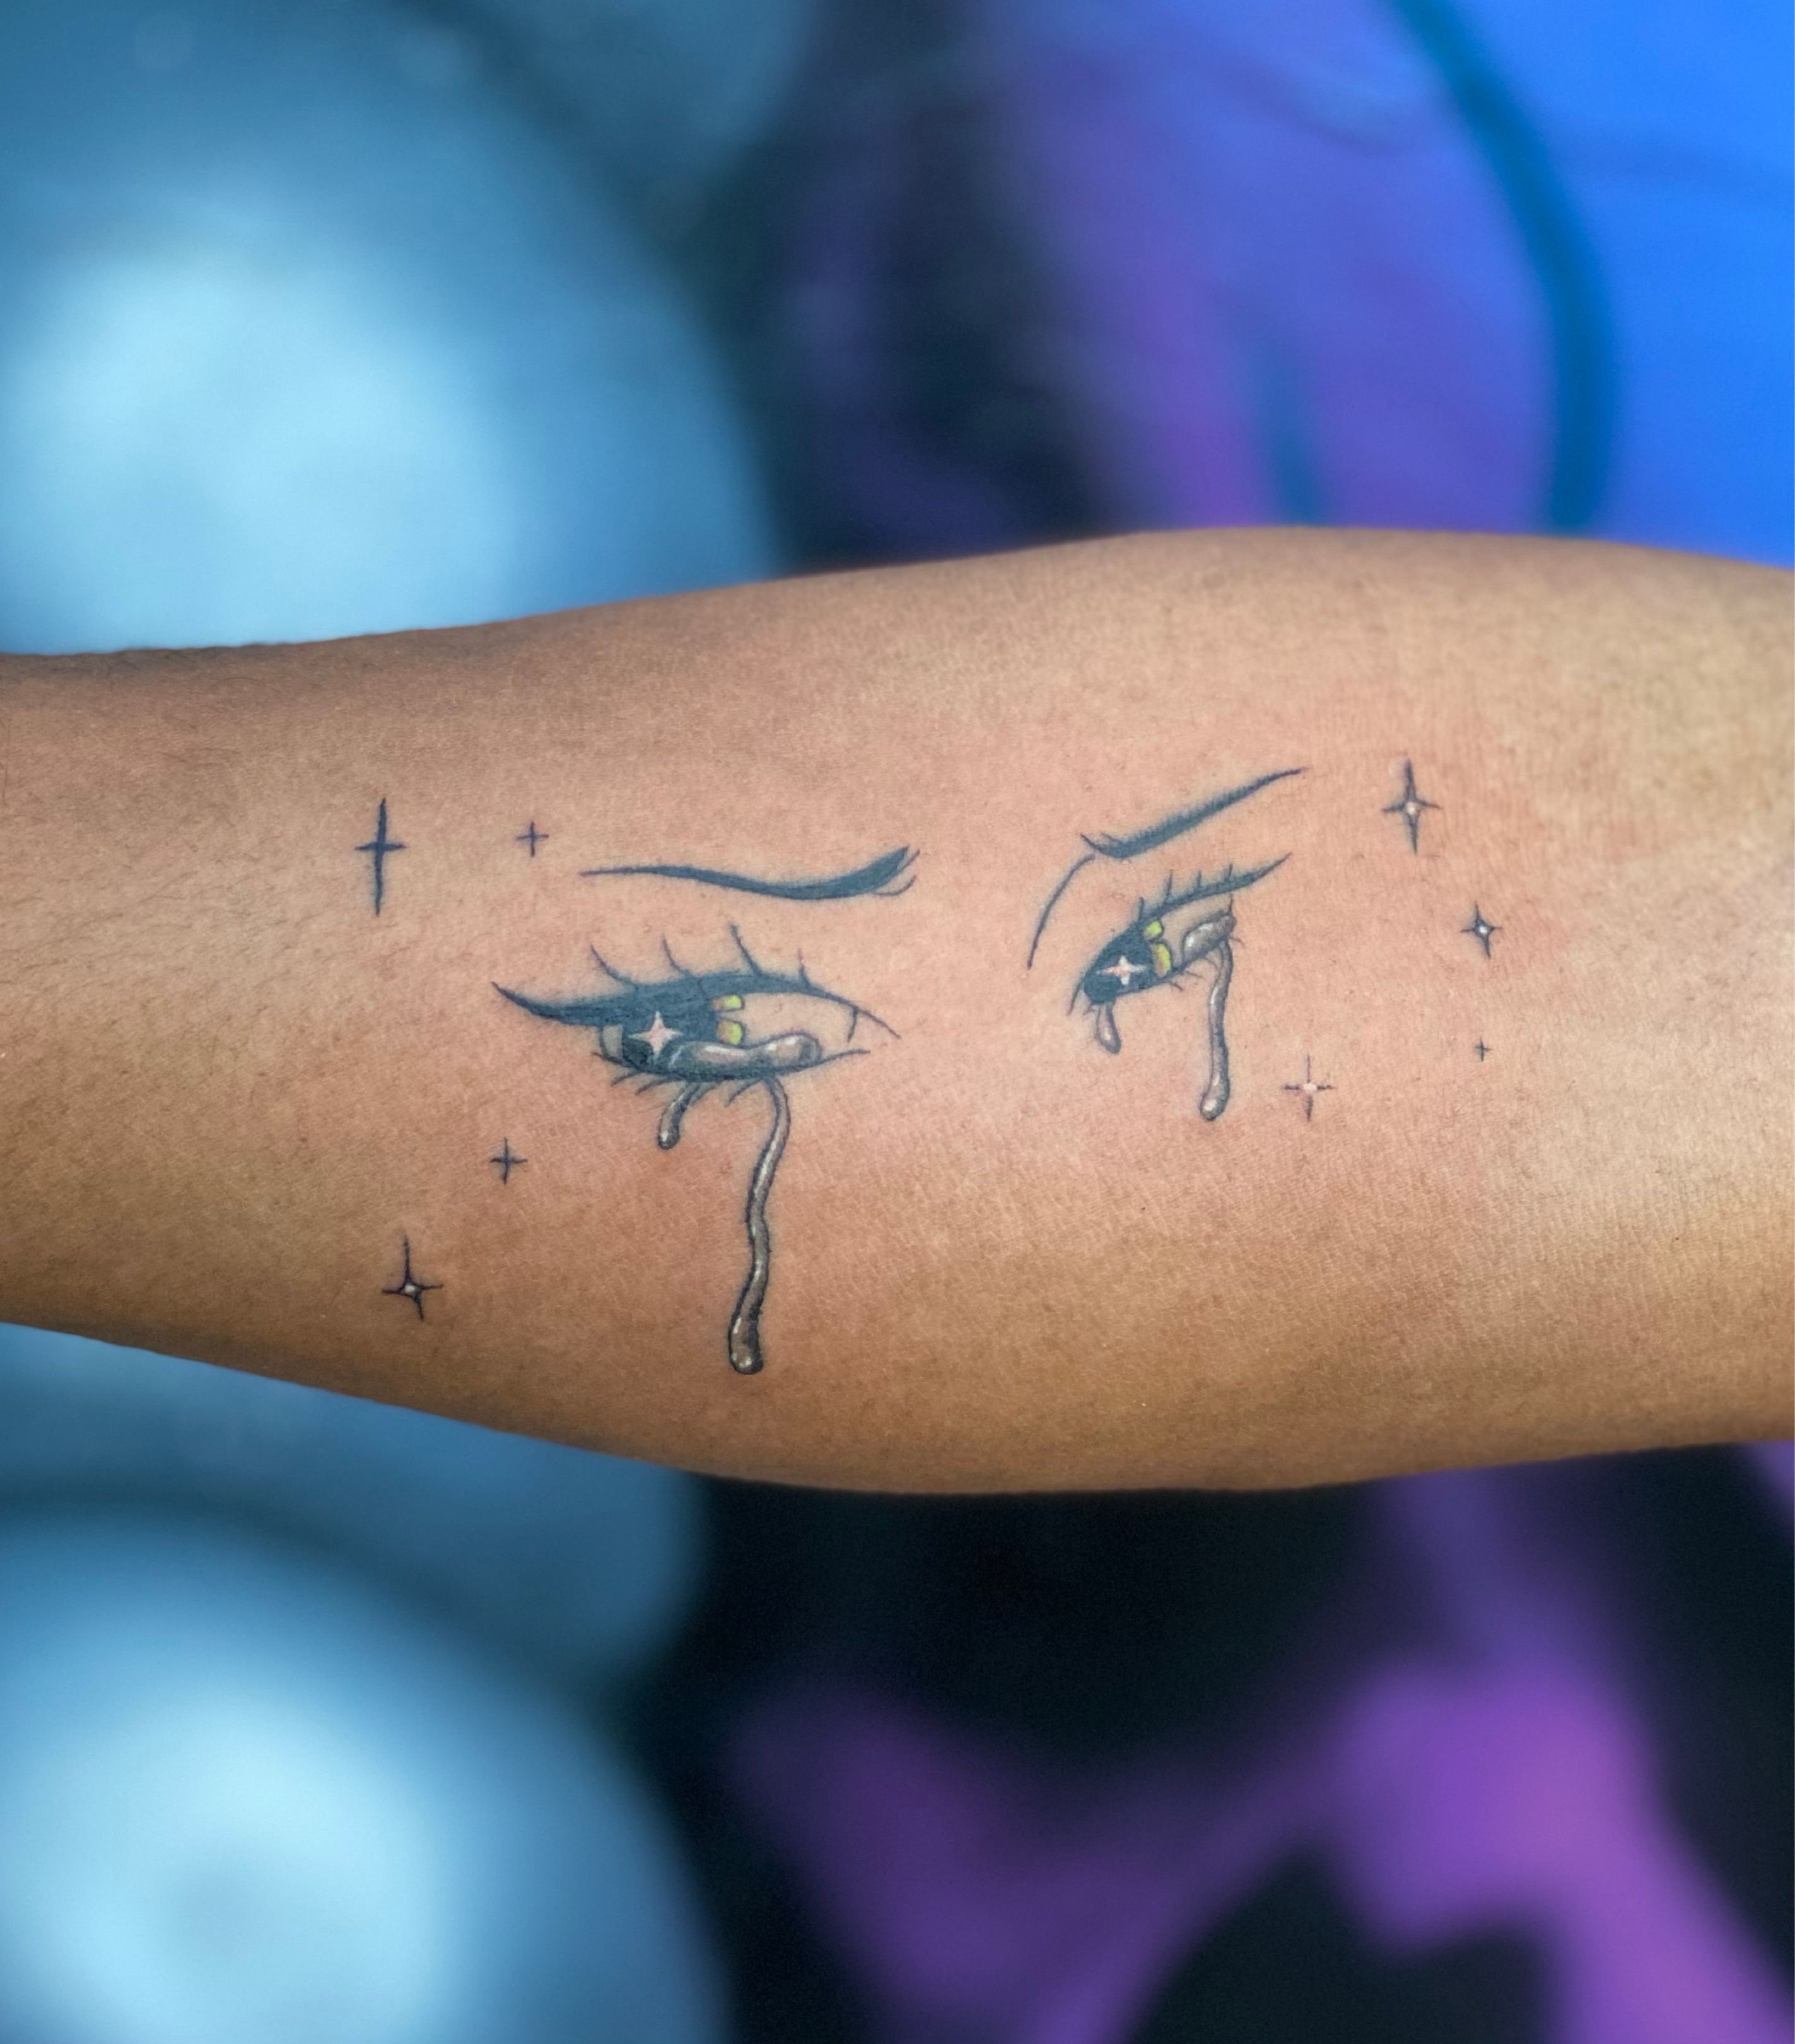 Buy Crying Eye Temporary Tattoo set of 3 Online in India  Etsy